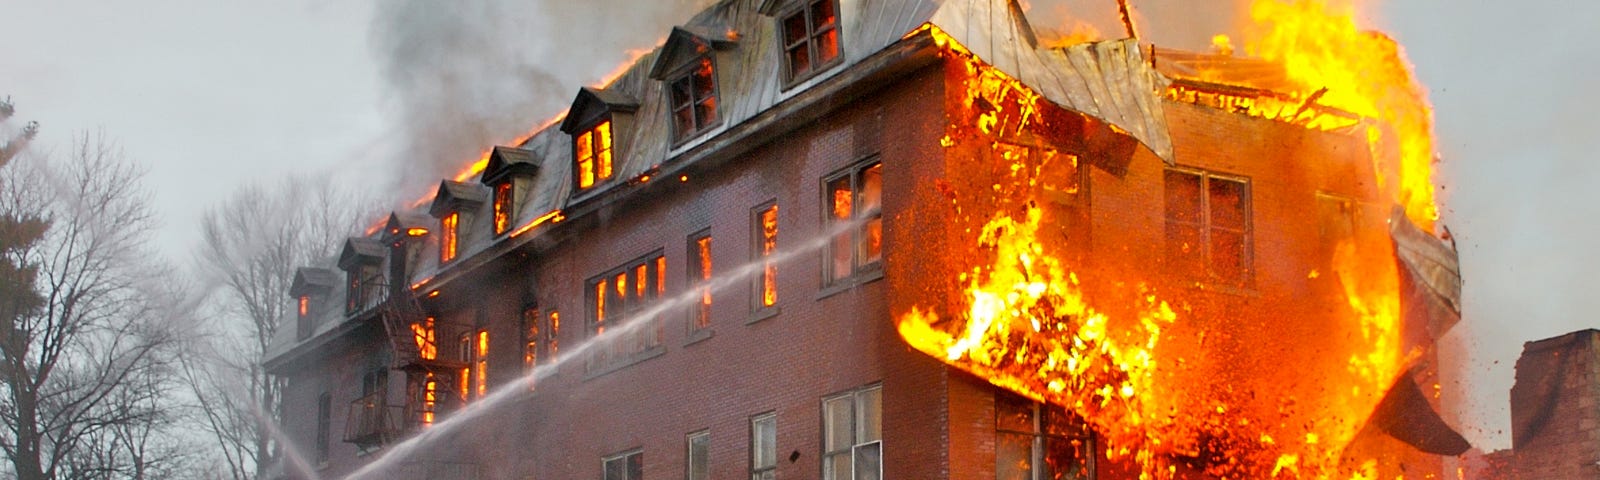 Fire consuming an abandoned building